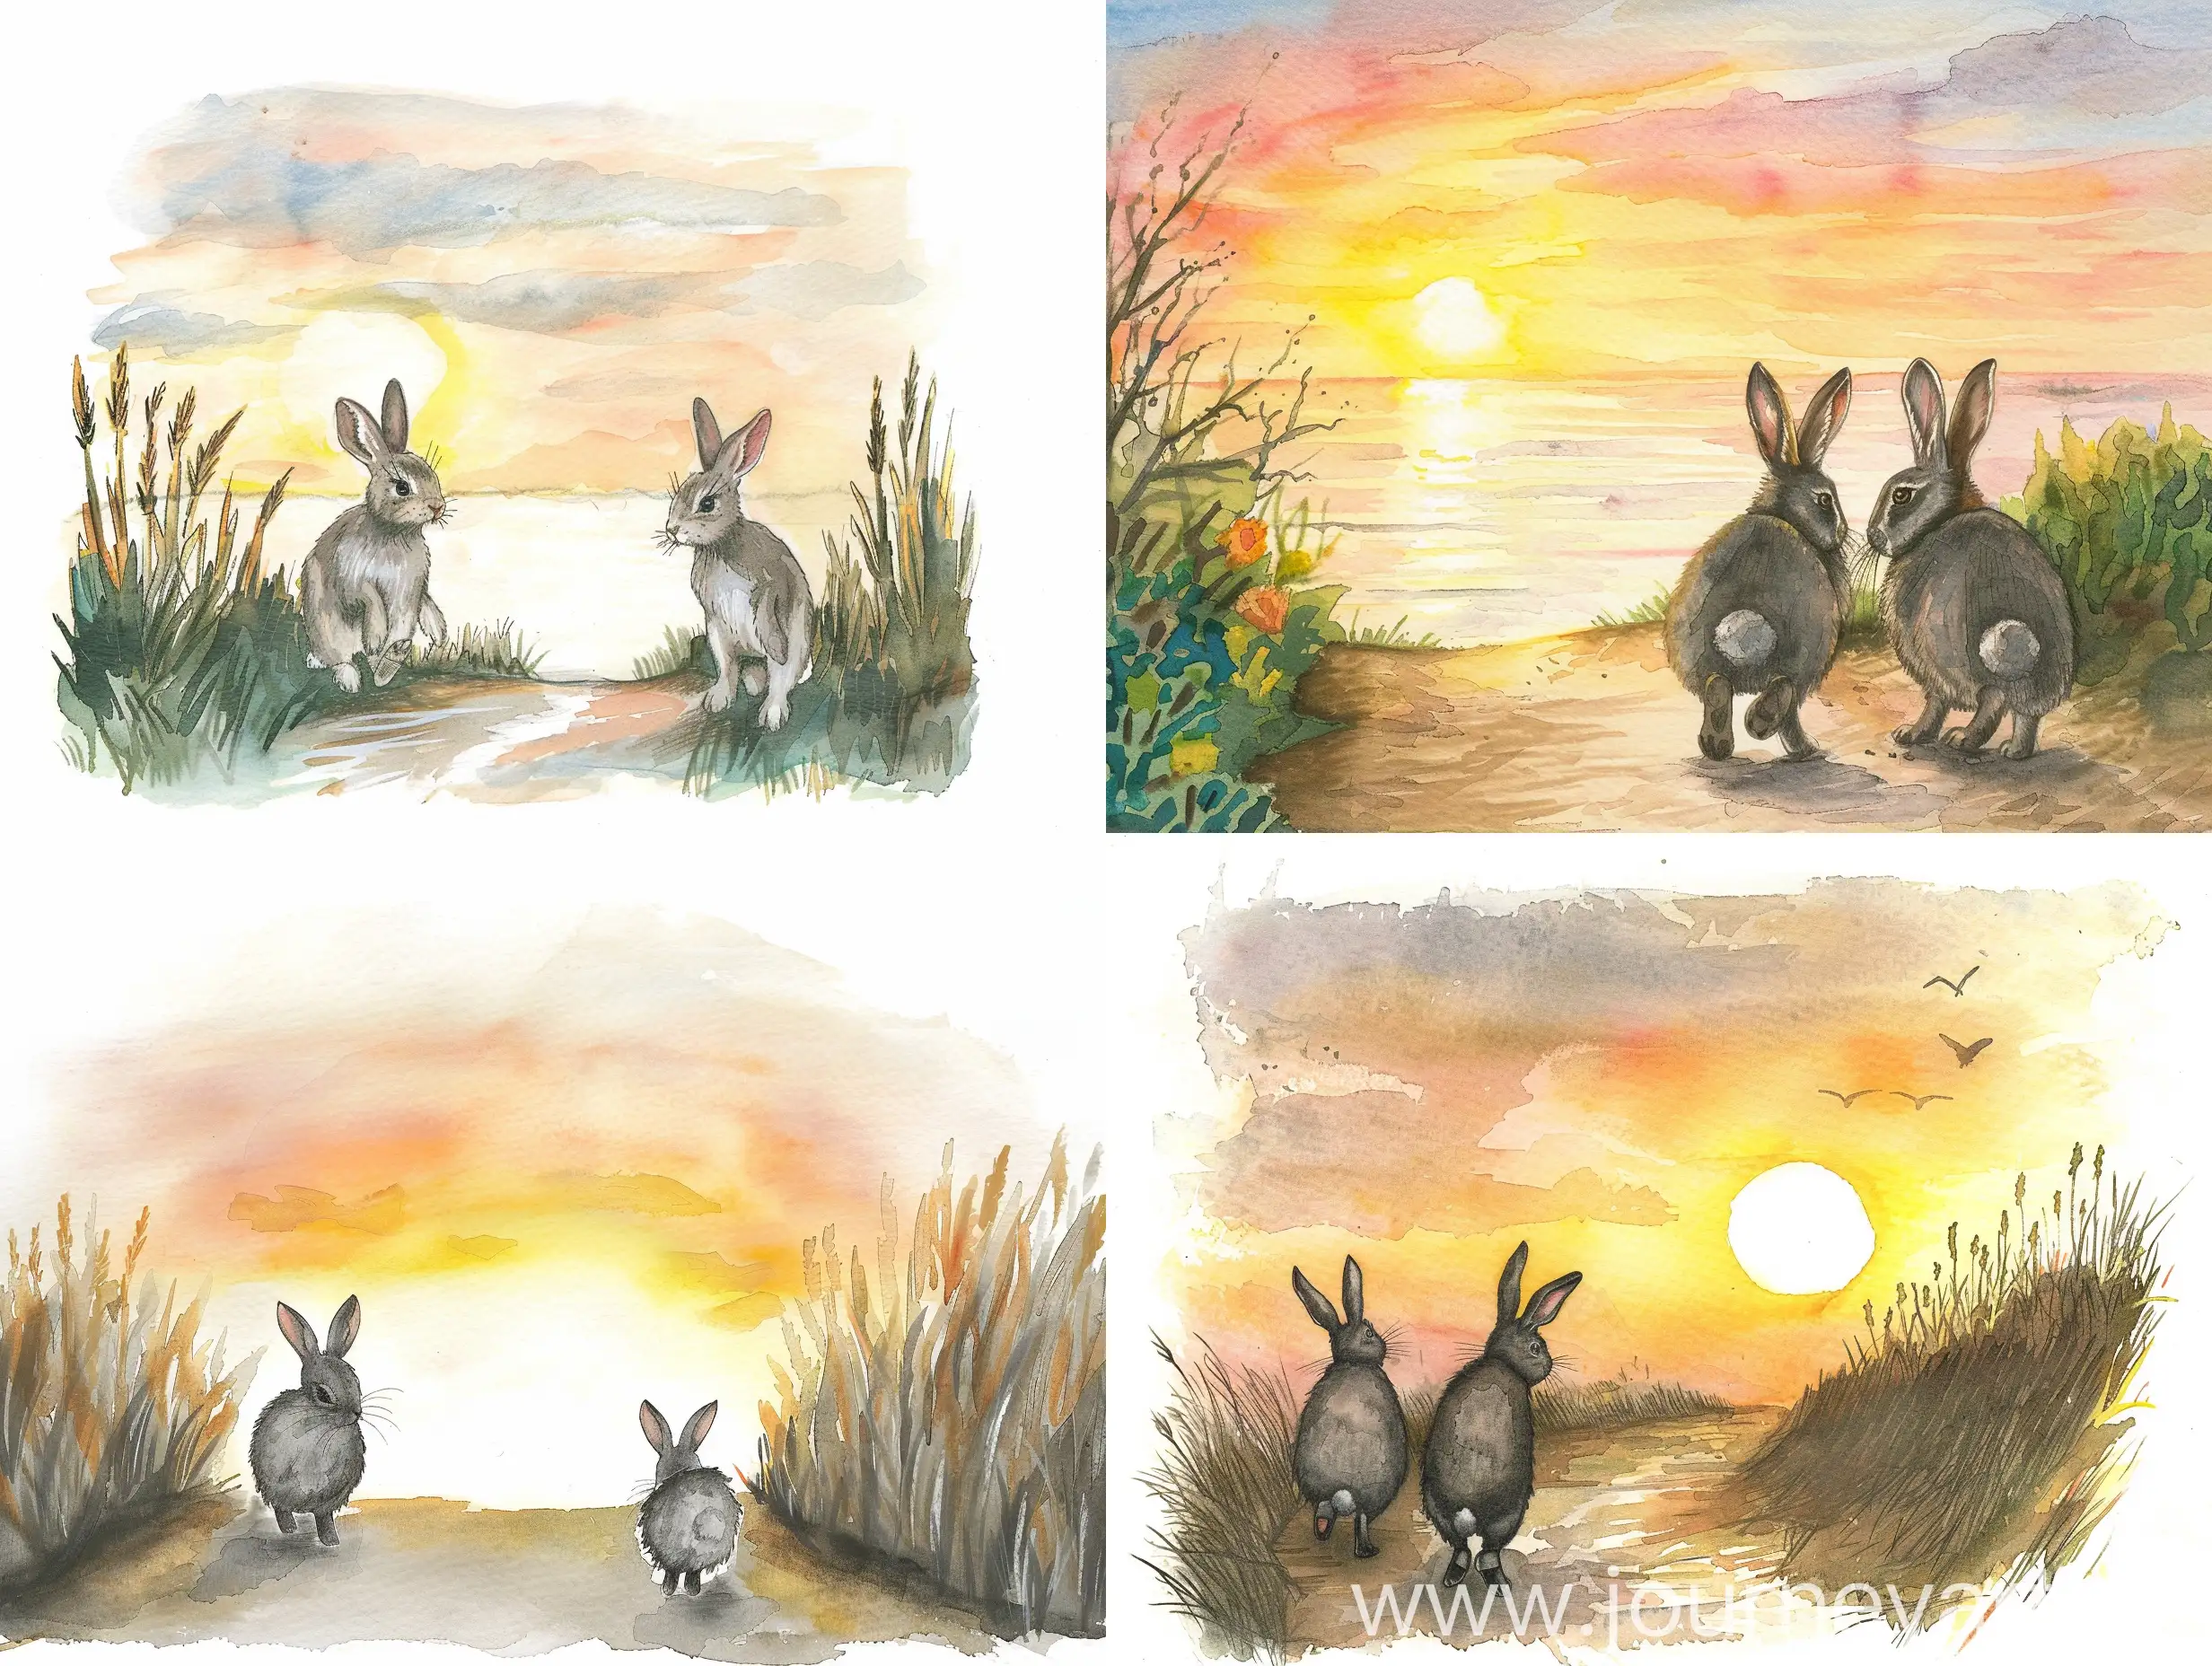 Two-Rabbits-Walking-into-Sunset-on-Path-Watercolor-Drawing